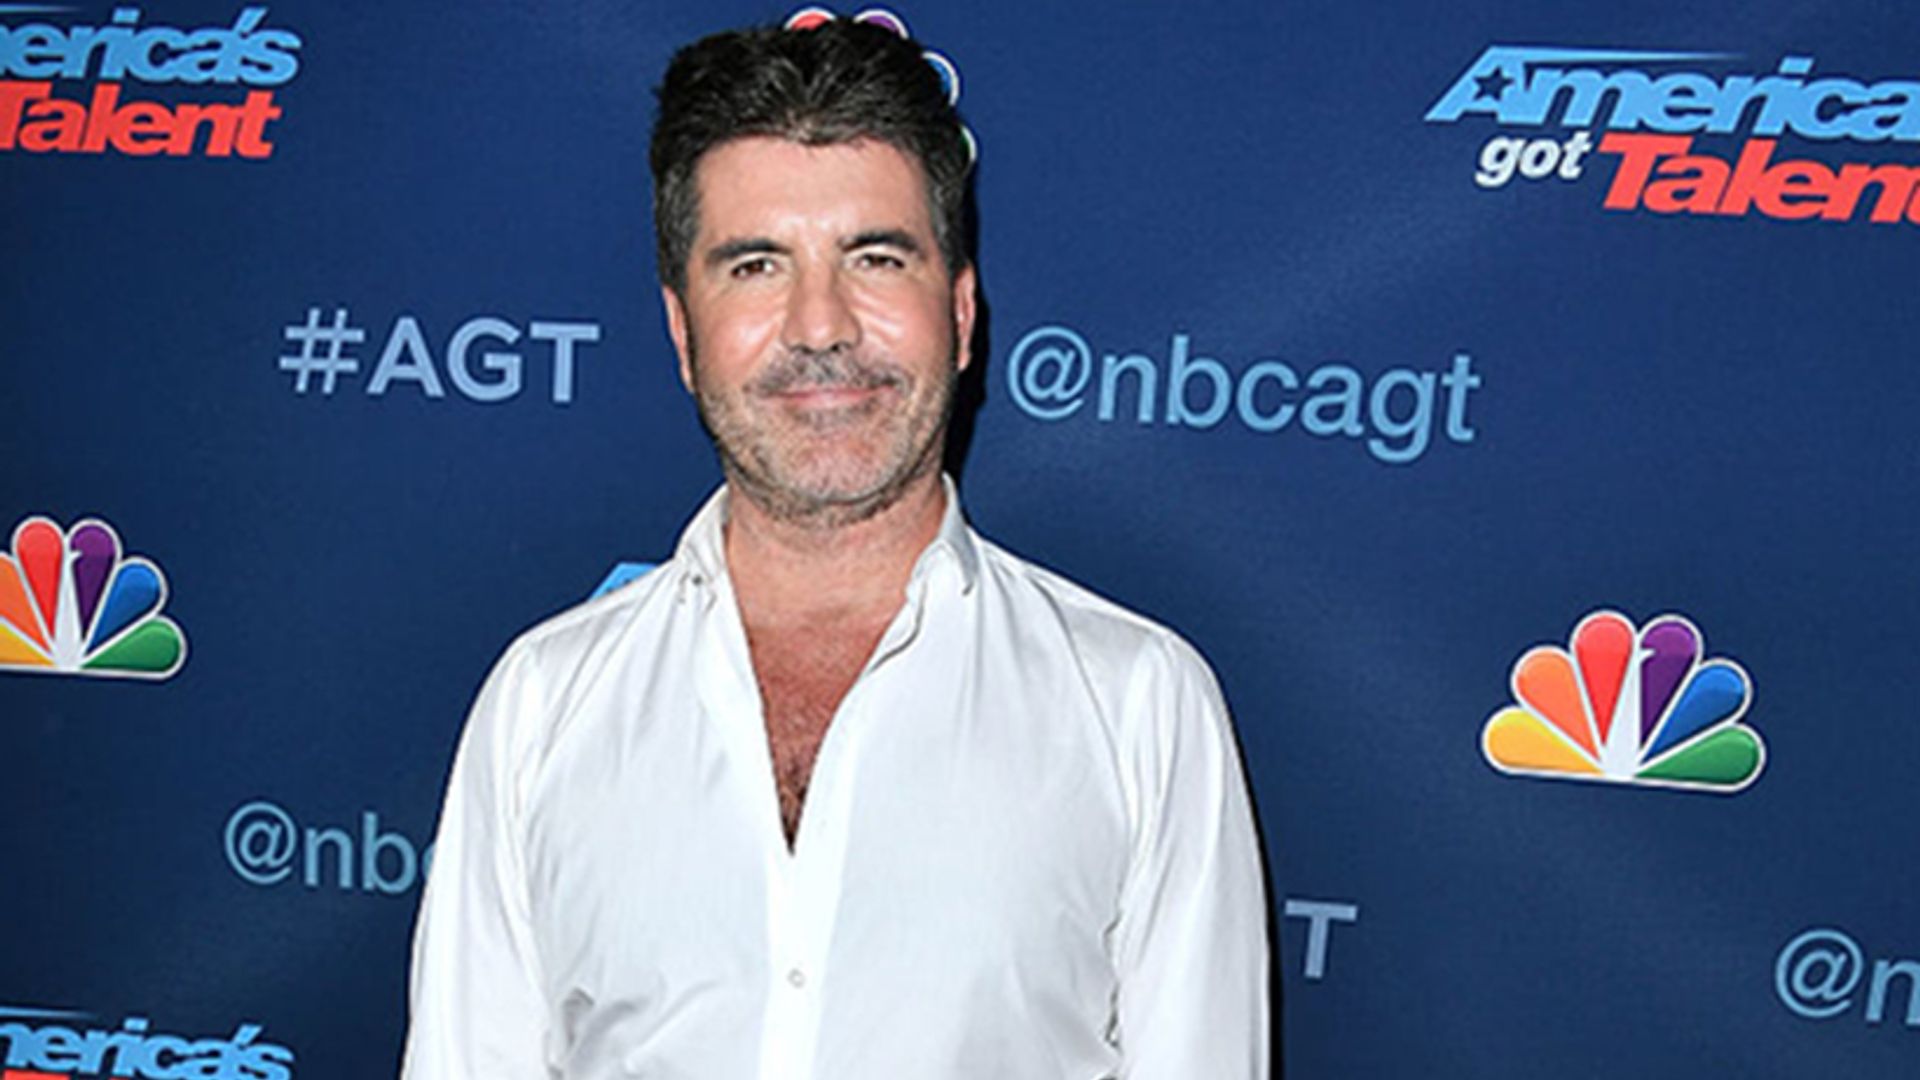 Simon Cowell shows support for his friend Mel B amidst her divorce battle